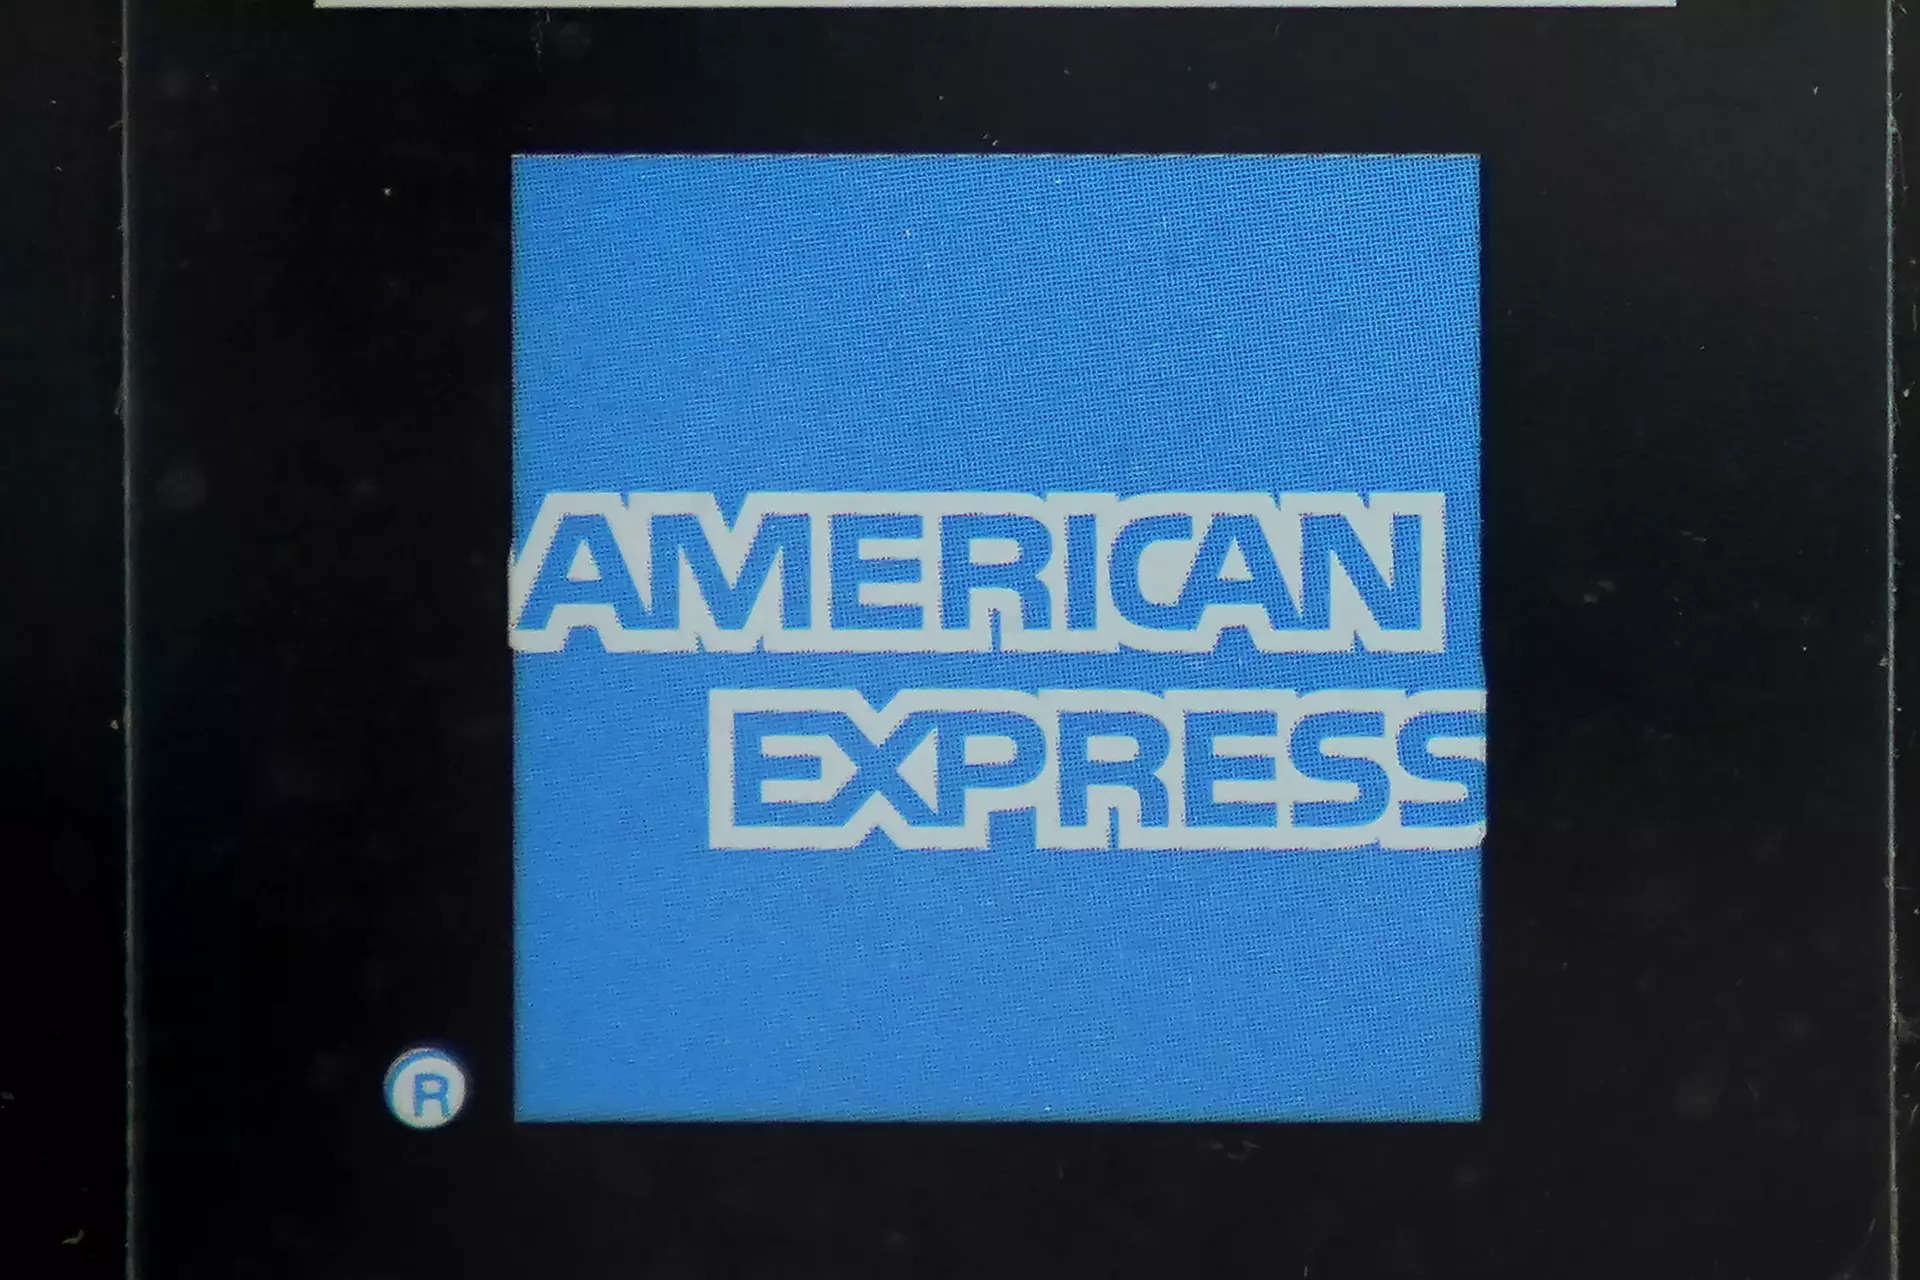 American Express opens its largest office worldwide in India 